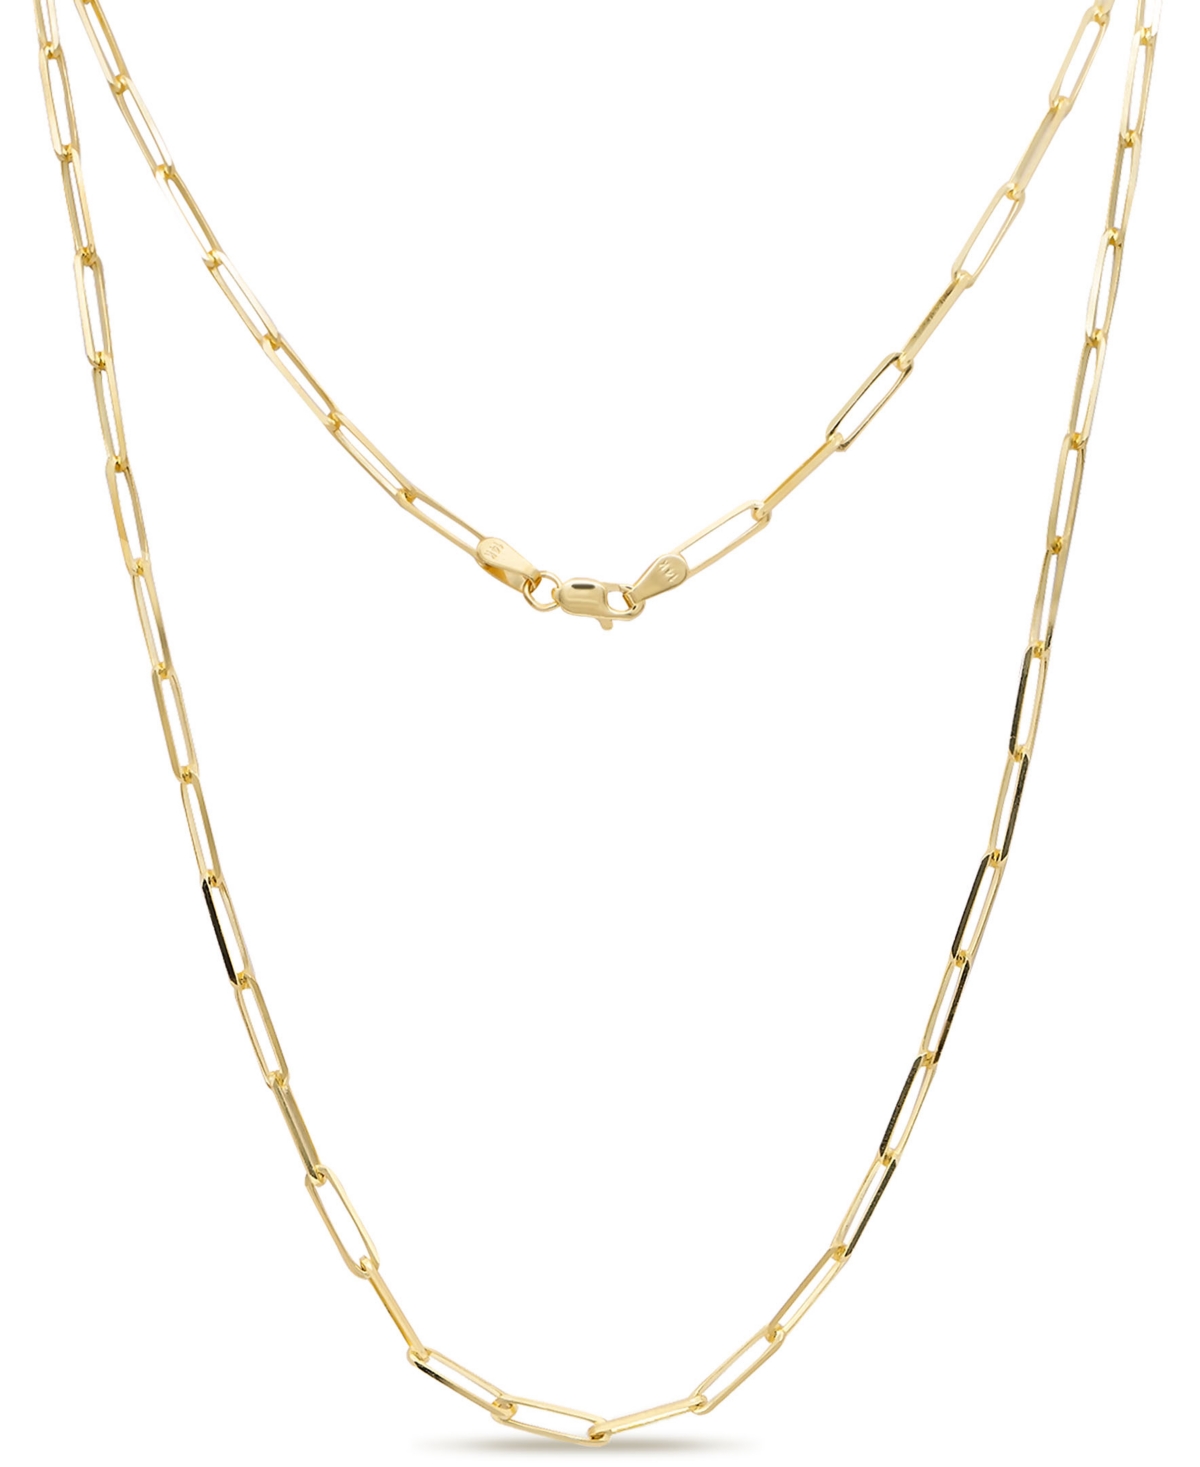 14K Gold Paperclip 2.8mm Chain Necklace, 24", approx. 6.3gr - Gold